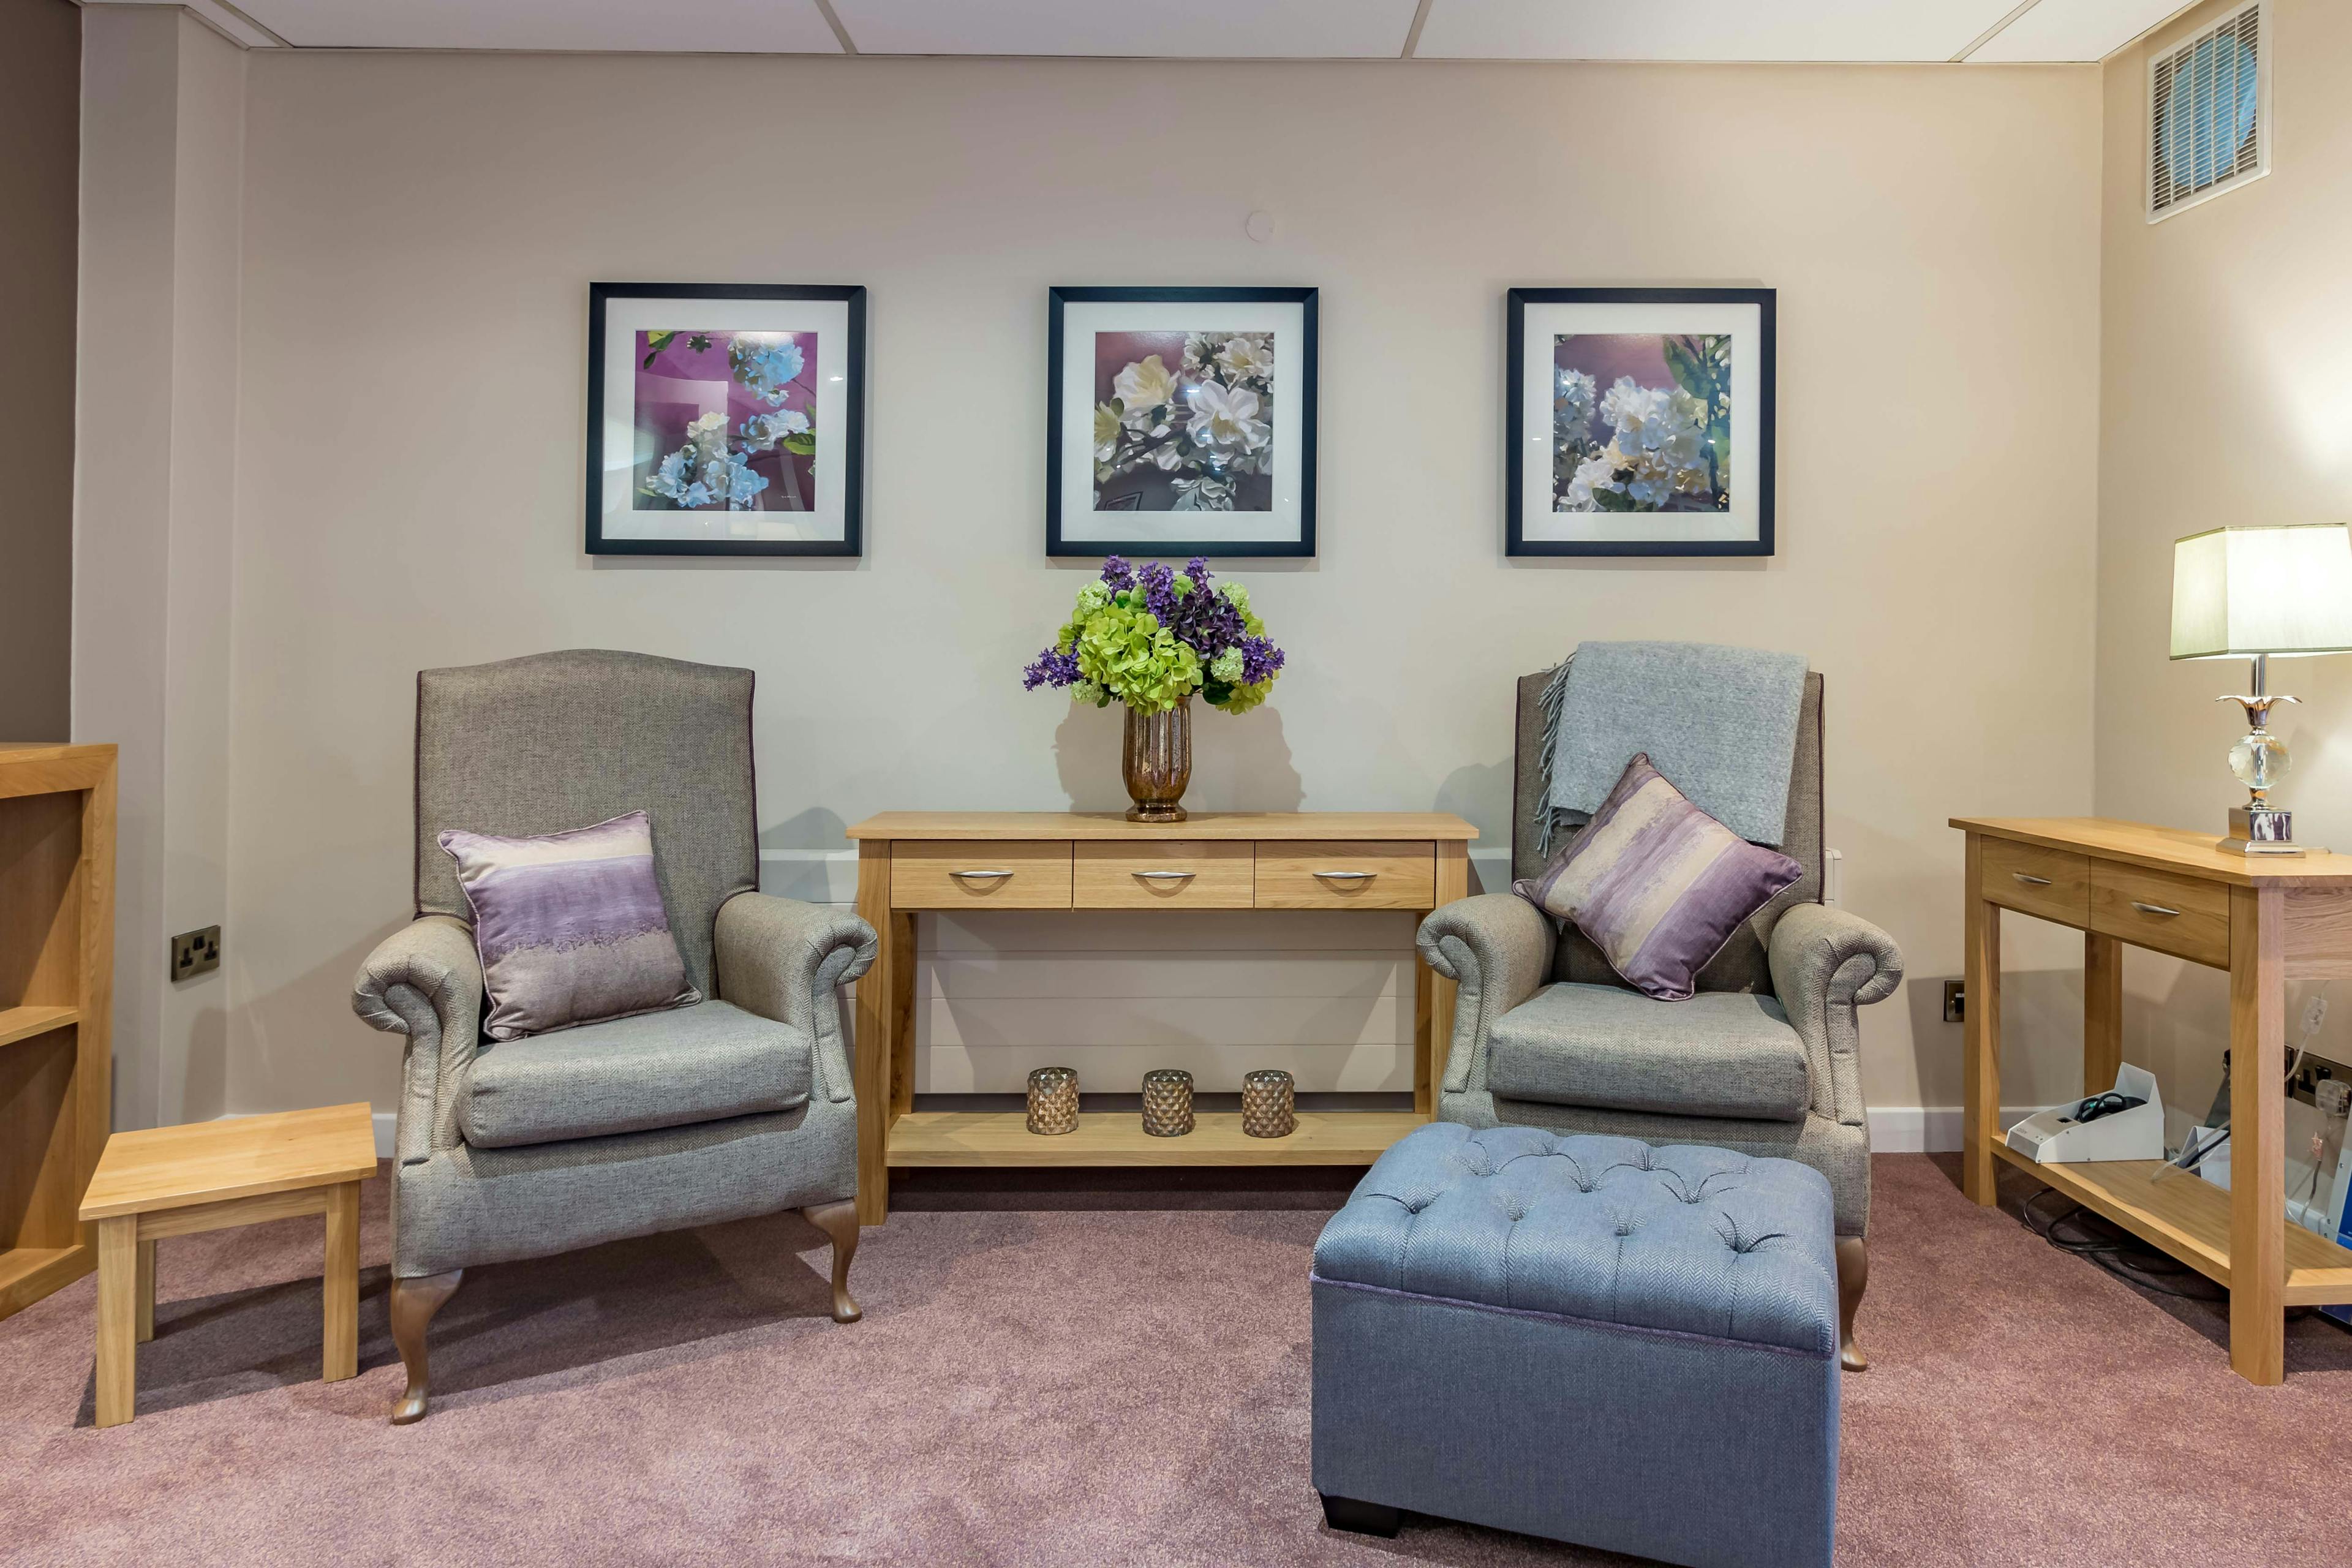 Lounge of Hafan-Y-Coed Care Home in Llanelli, Wales